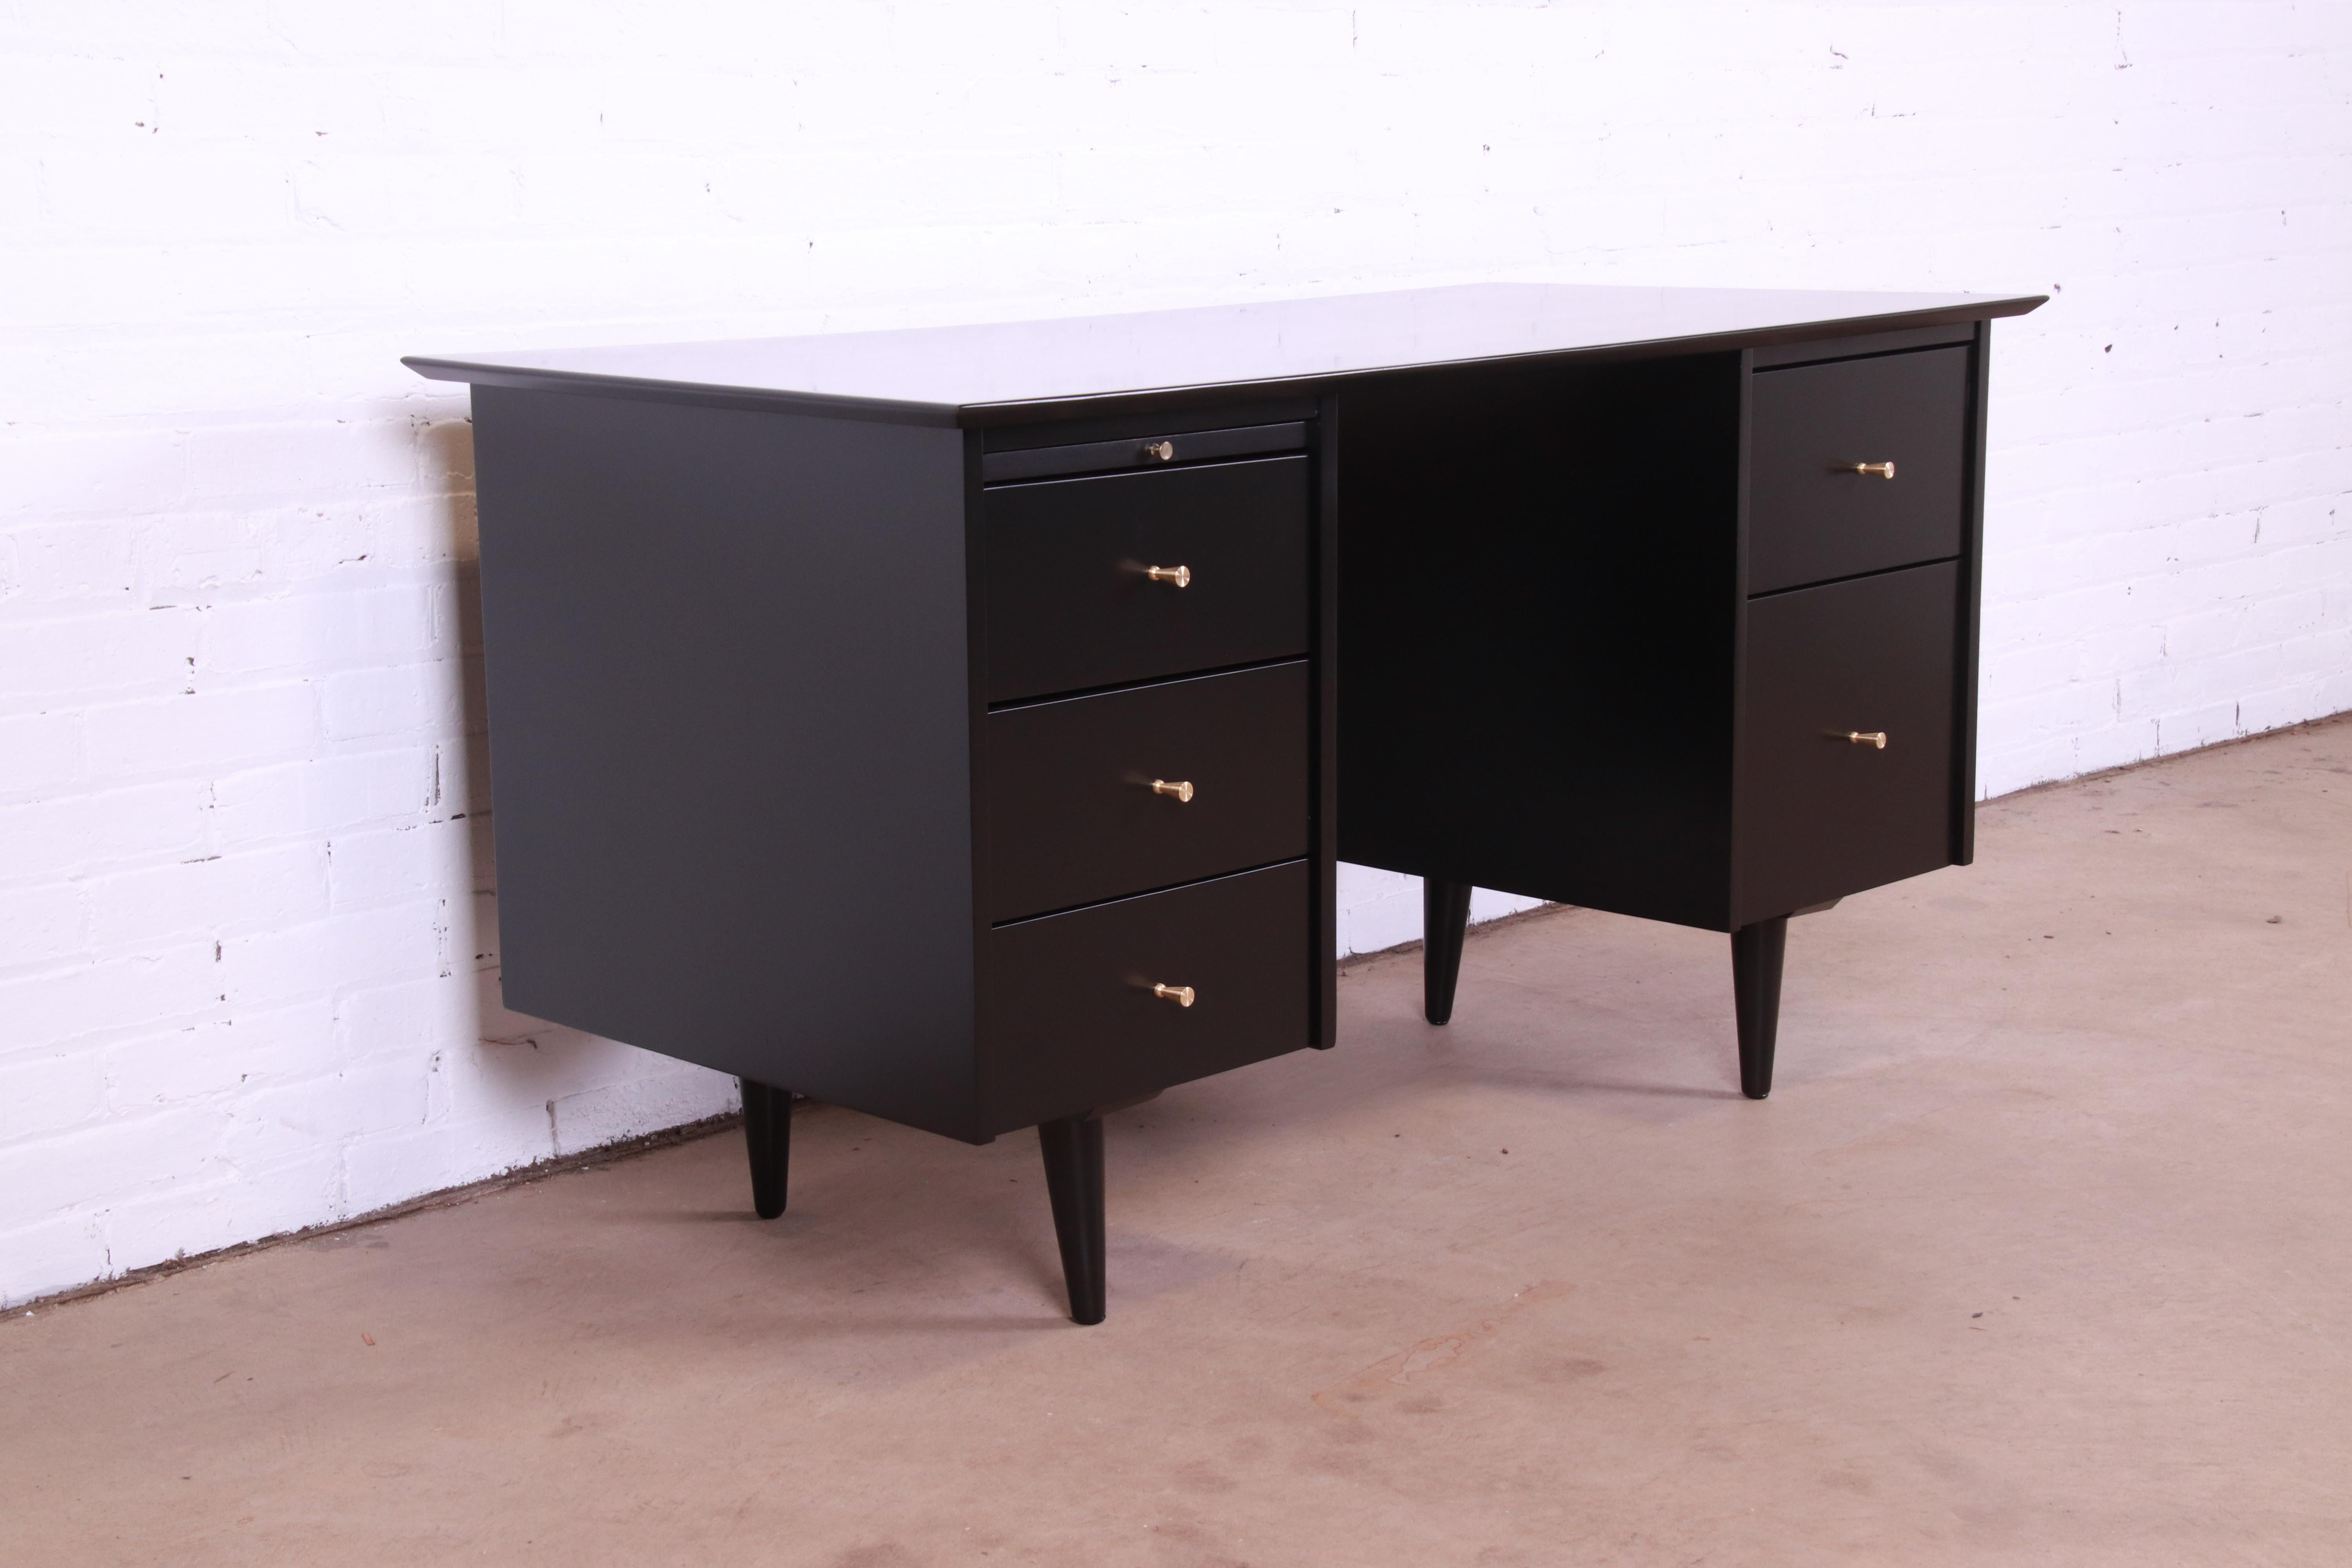 Mid-20th Century Paul McCobb Planner Group Black Lacquered Double Pedestal Desk, Newly Refinished